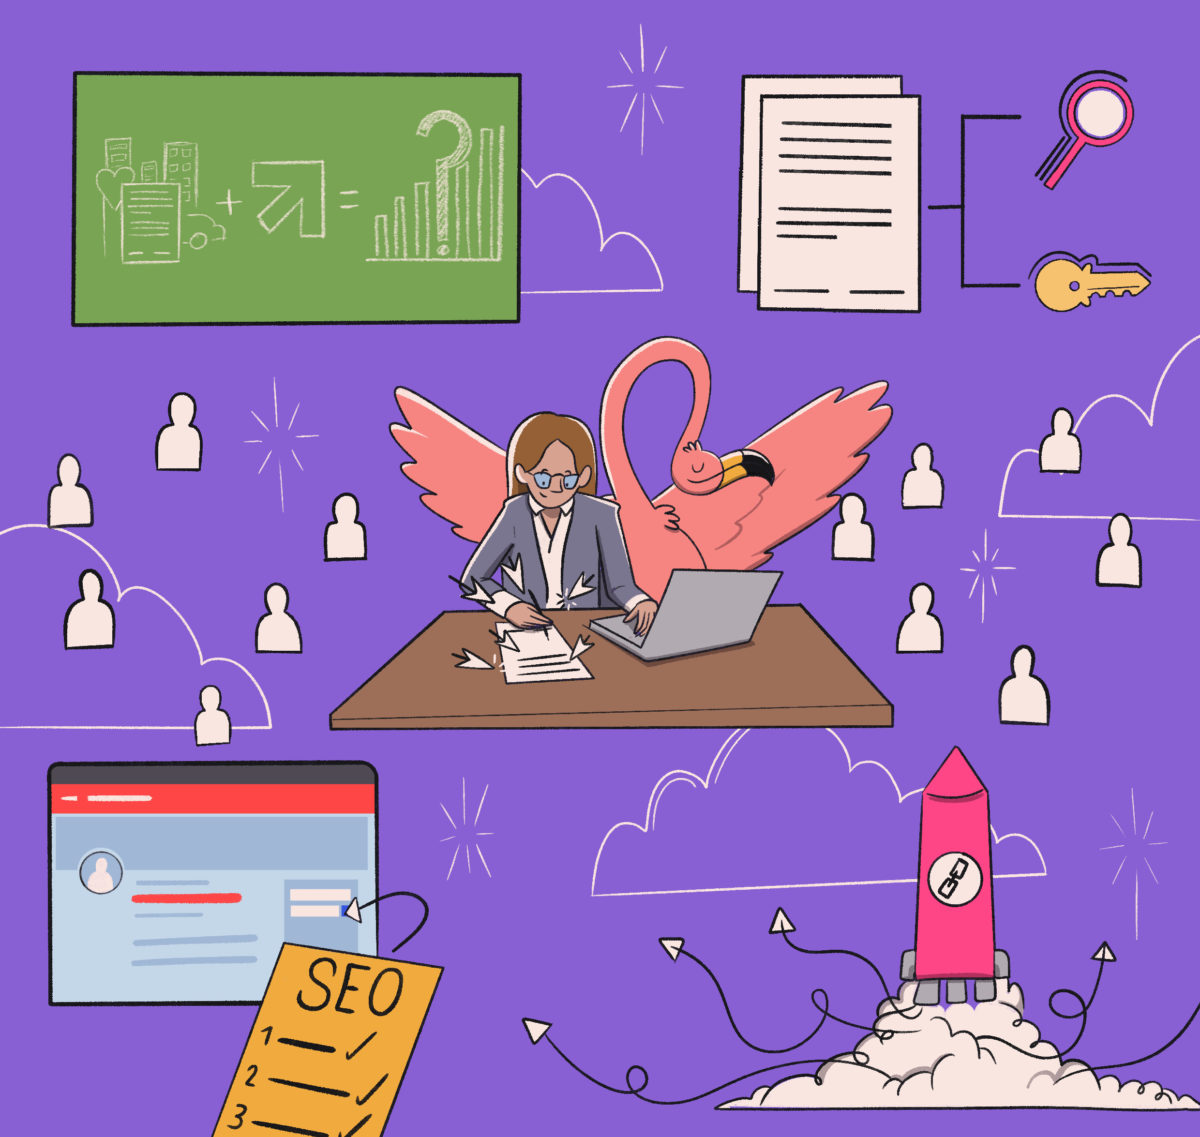 A stylized graphic showing a person and a creature with wings working together at a desk, surrounded by various business and digital marketing icons.